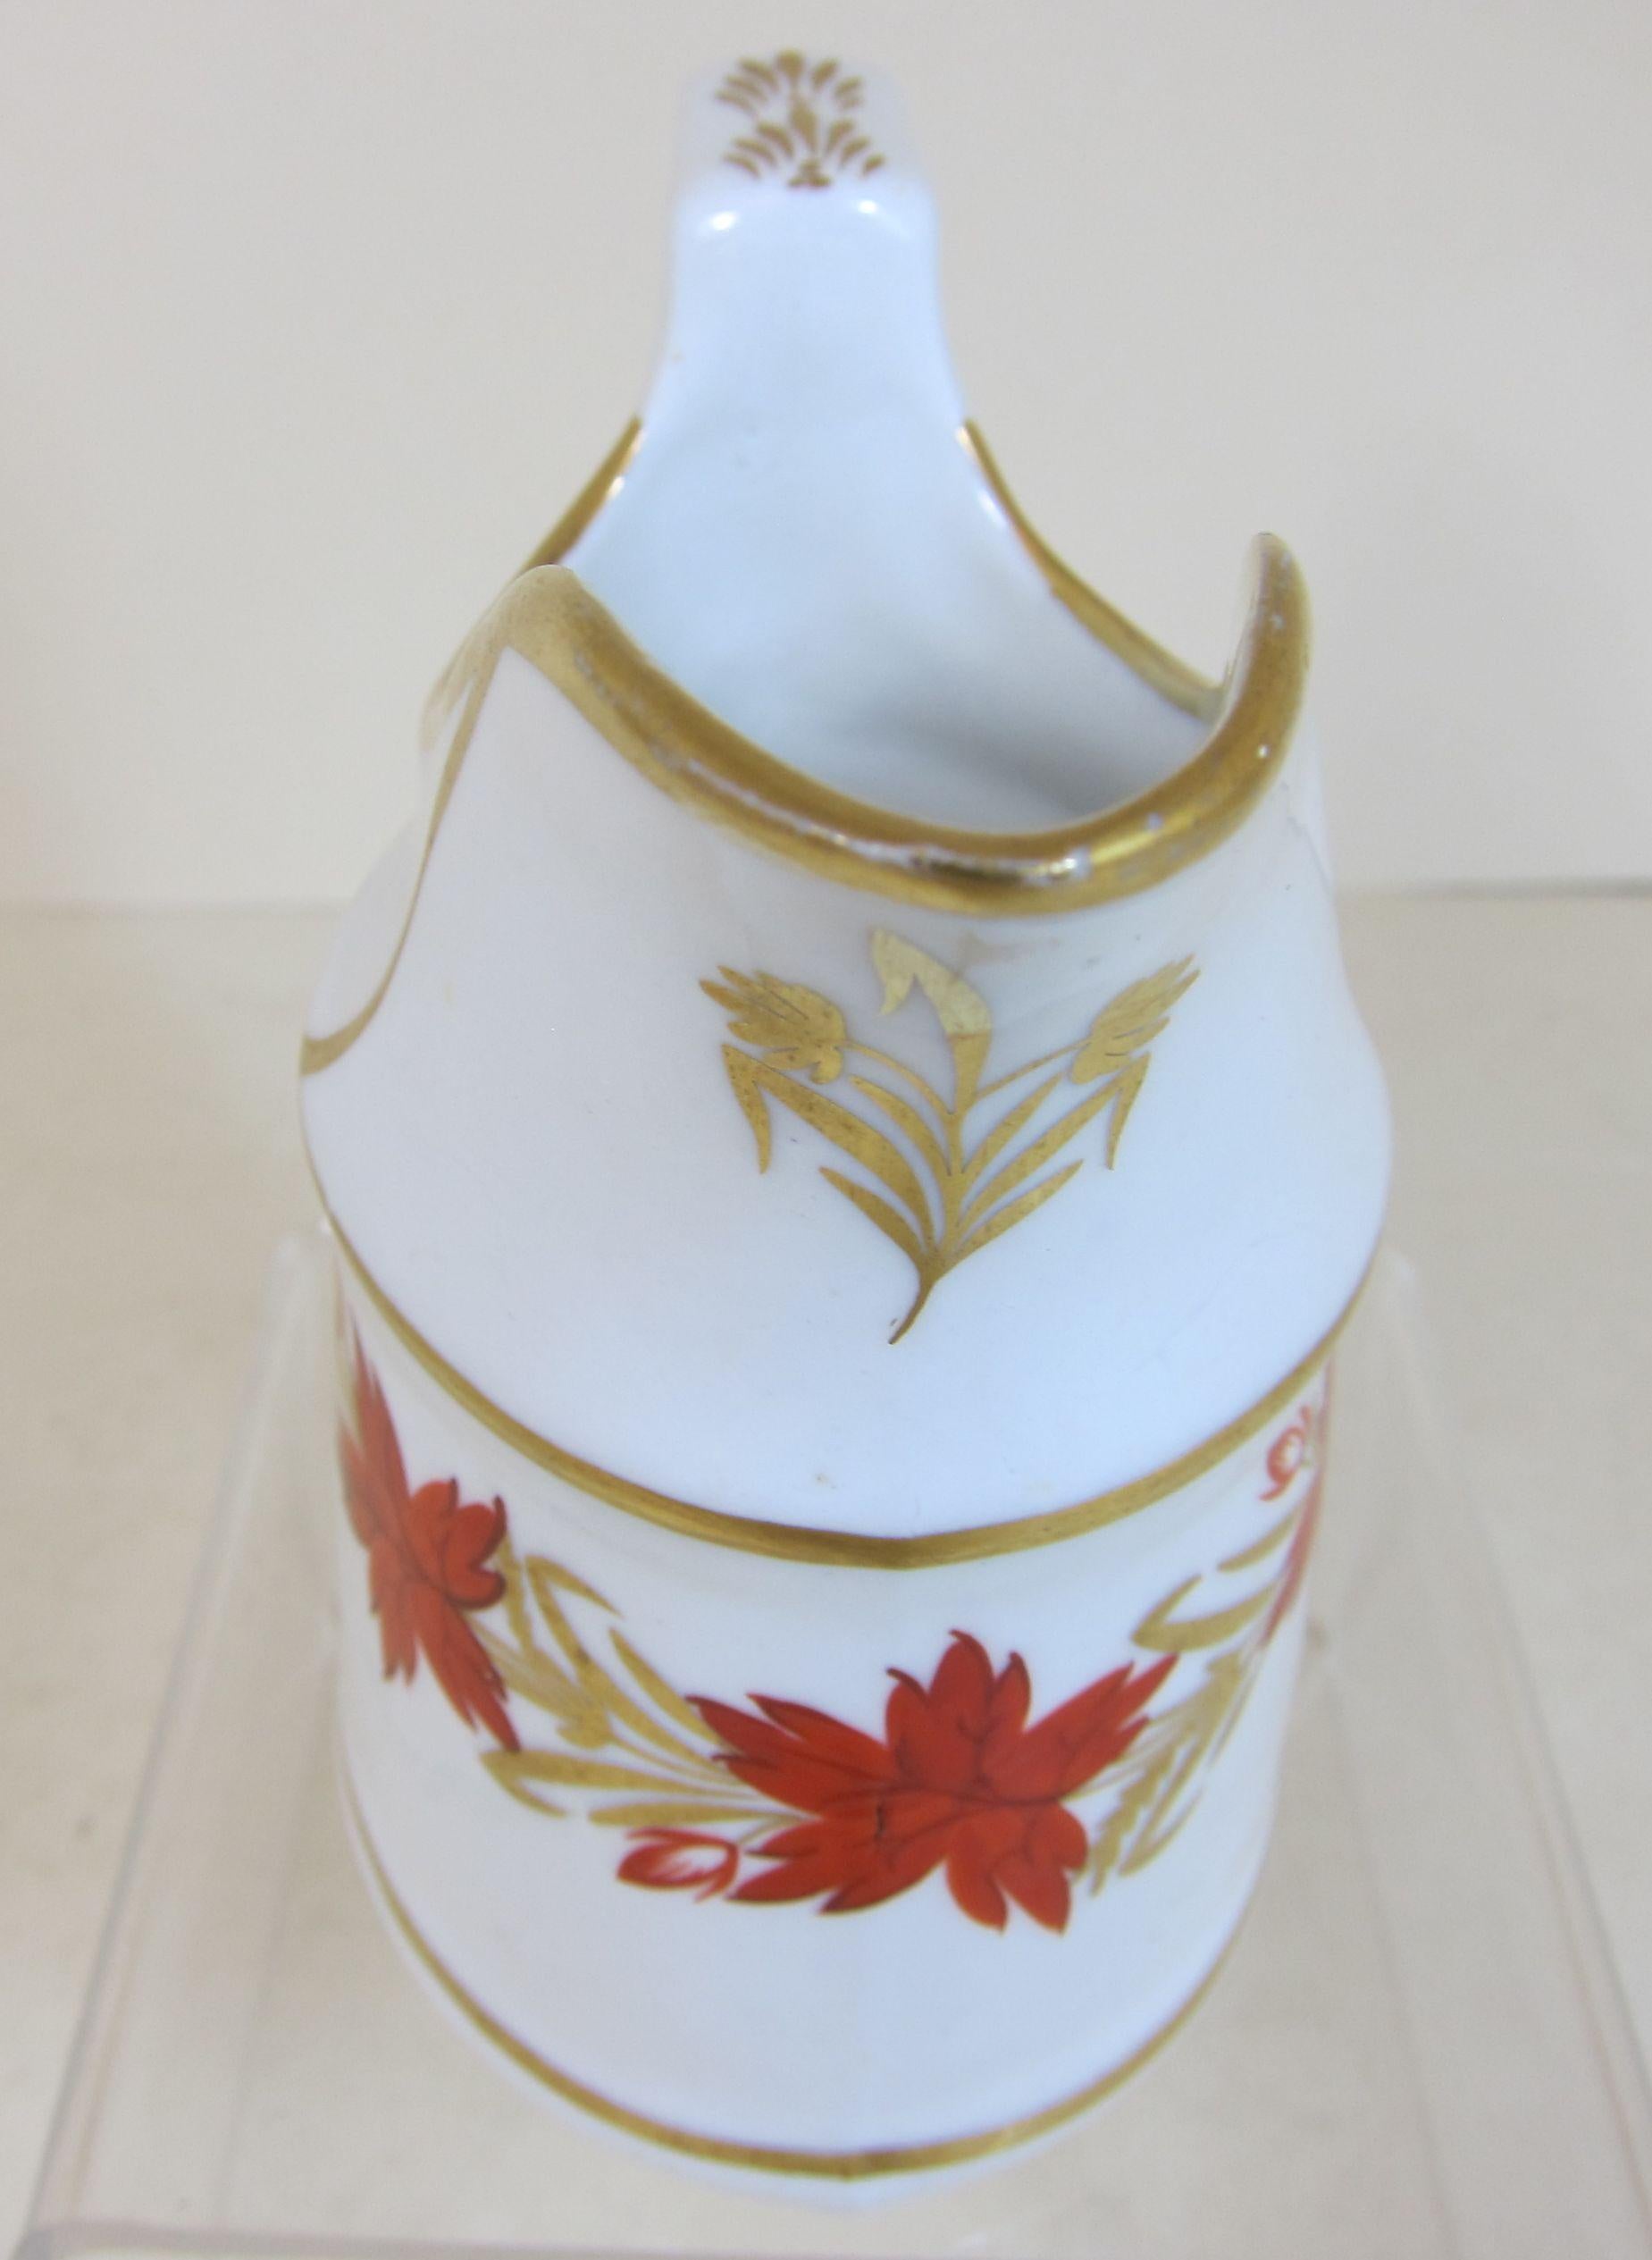 Coalport Porcelain creamer decorated with red and gilt flowers.